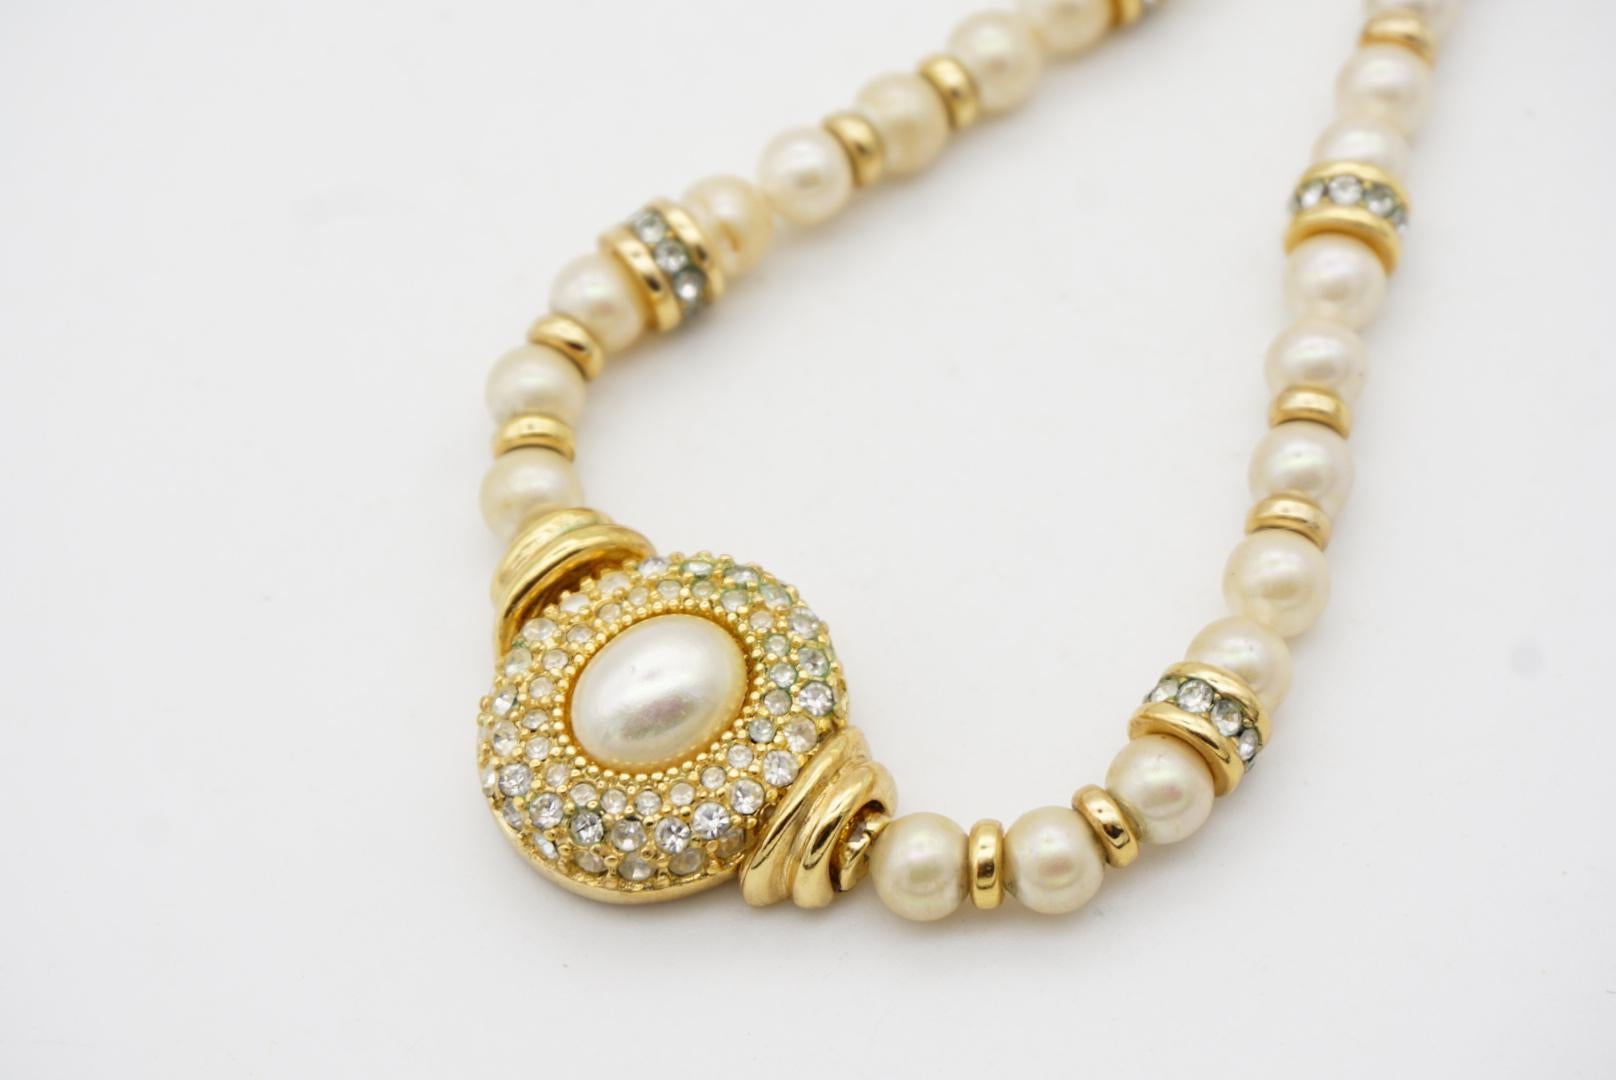 Christian Dior Vintage 1980s White Round Oval Pearl Crystals Pendant Necklace For Sale 7